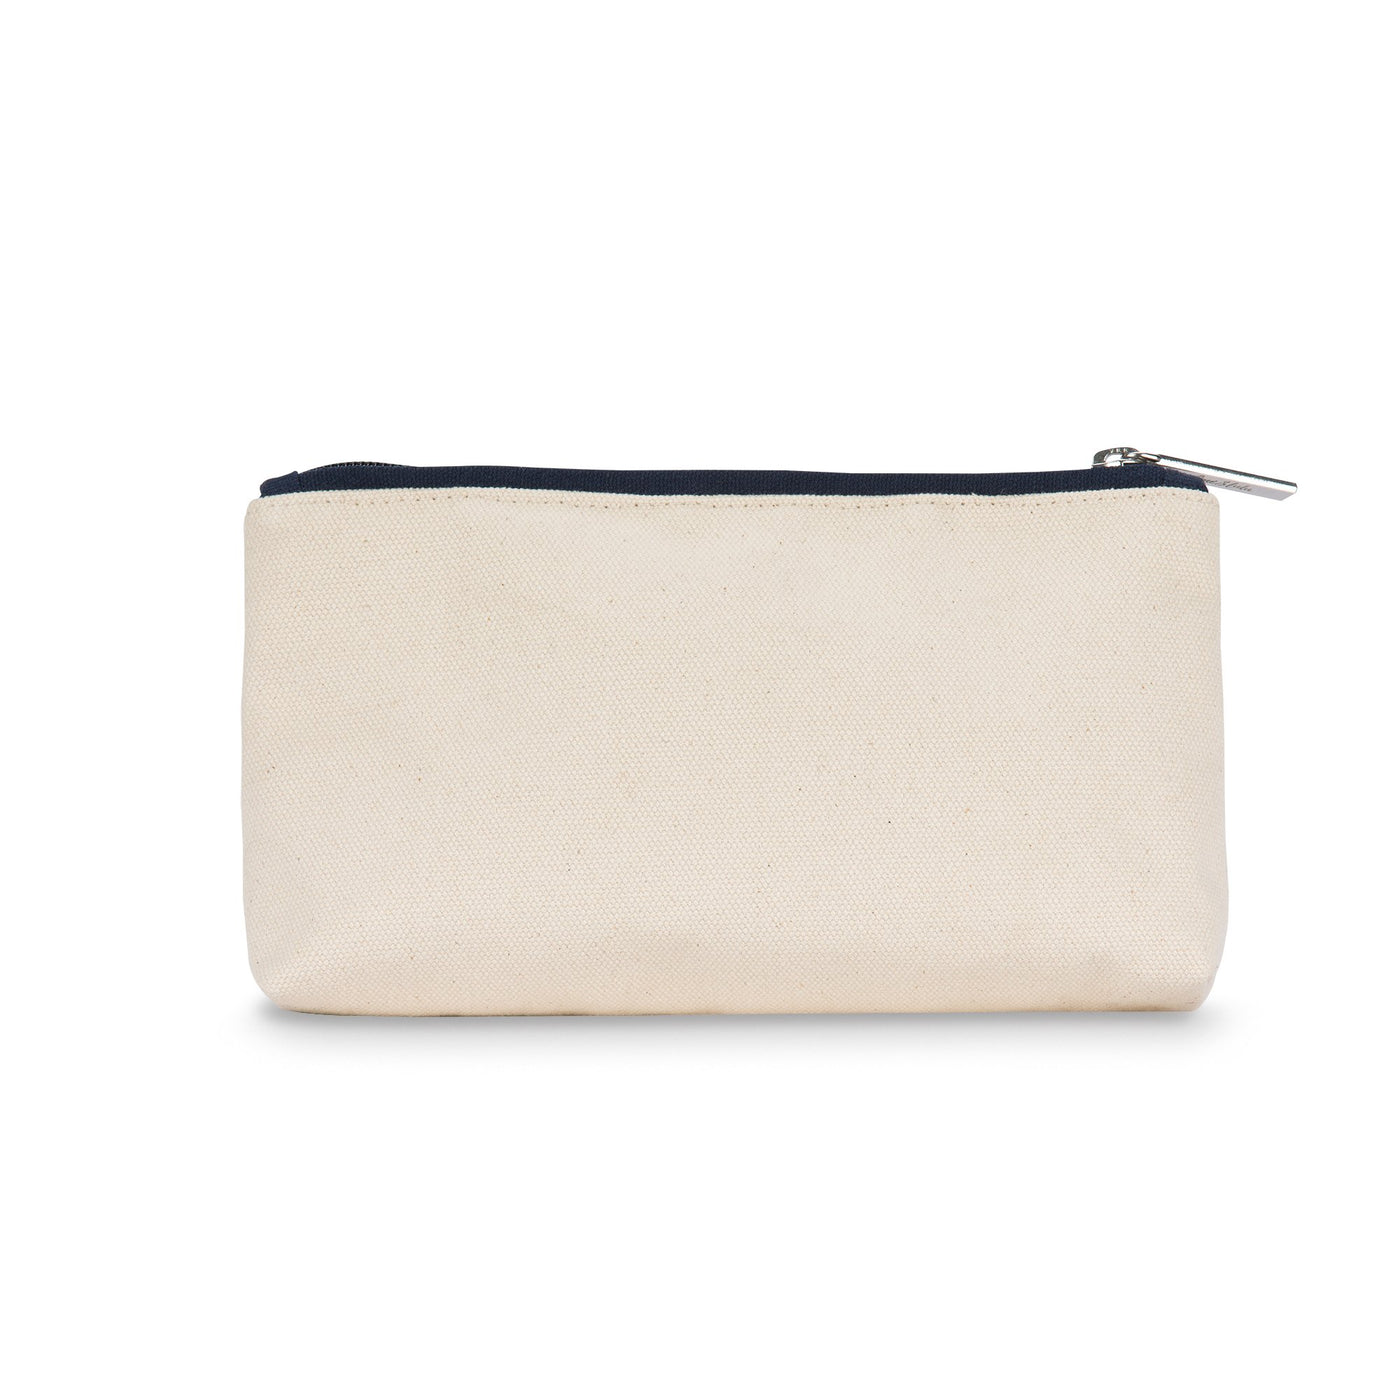 back view of tan canvas pouch